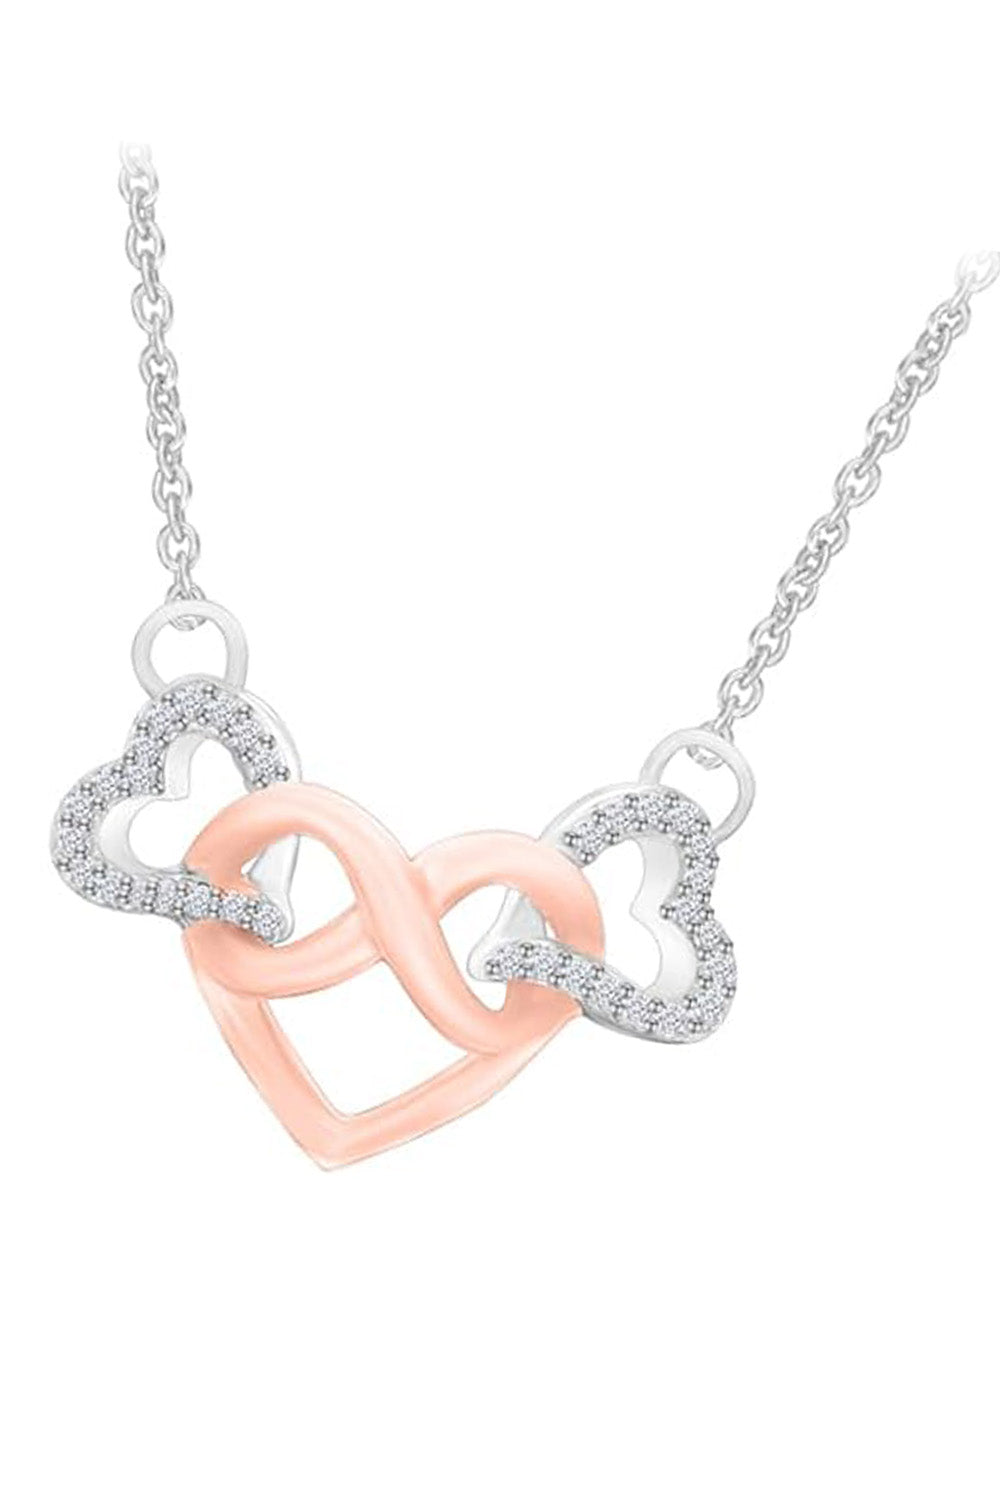 White Gold Color Infinity Love Heart Interlocking Pendant Necklace